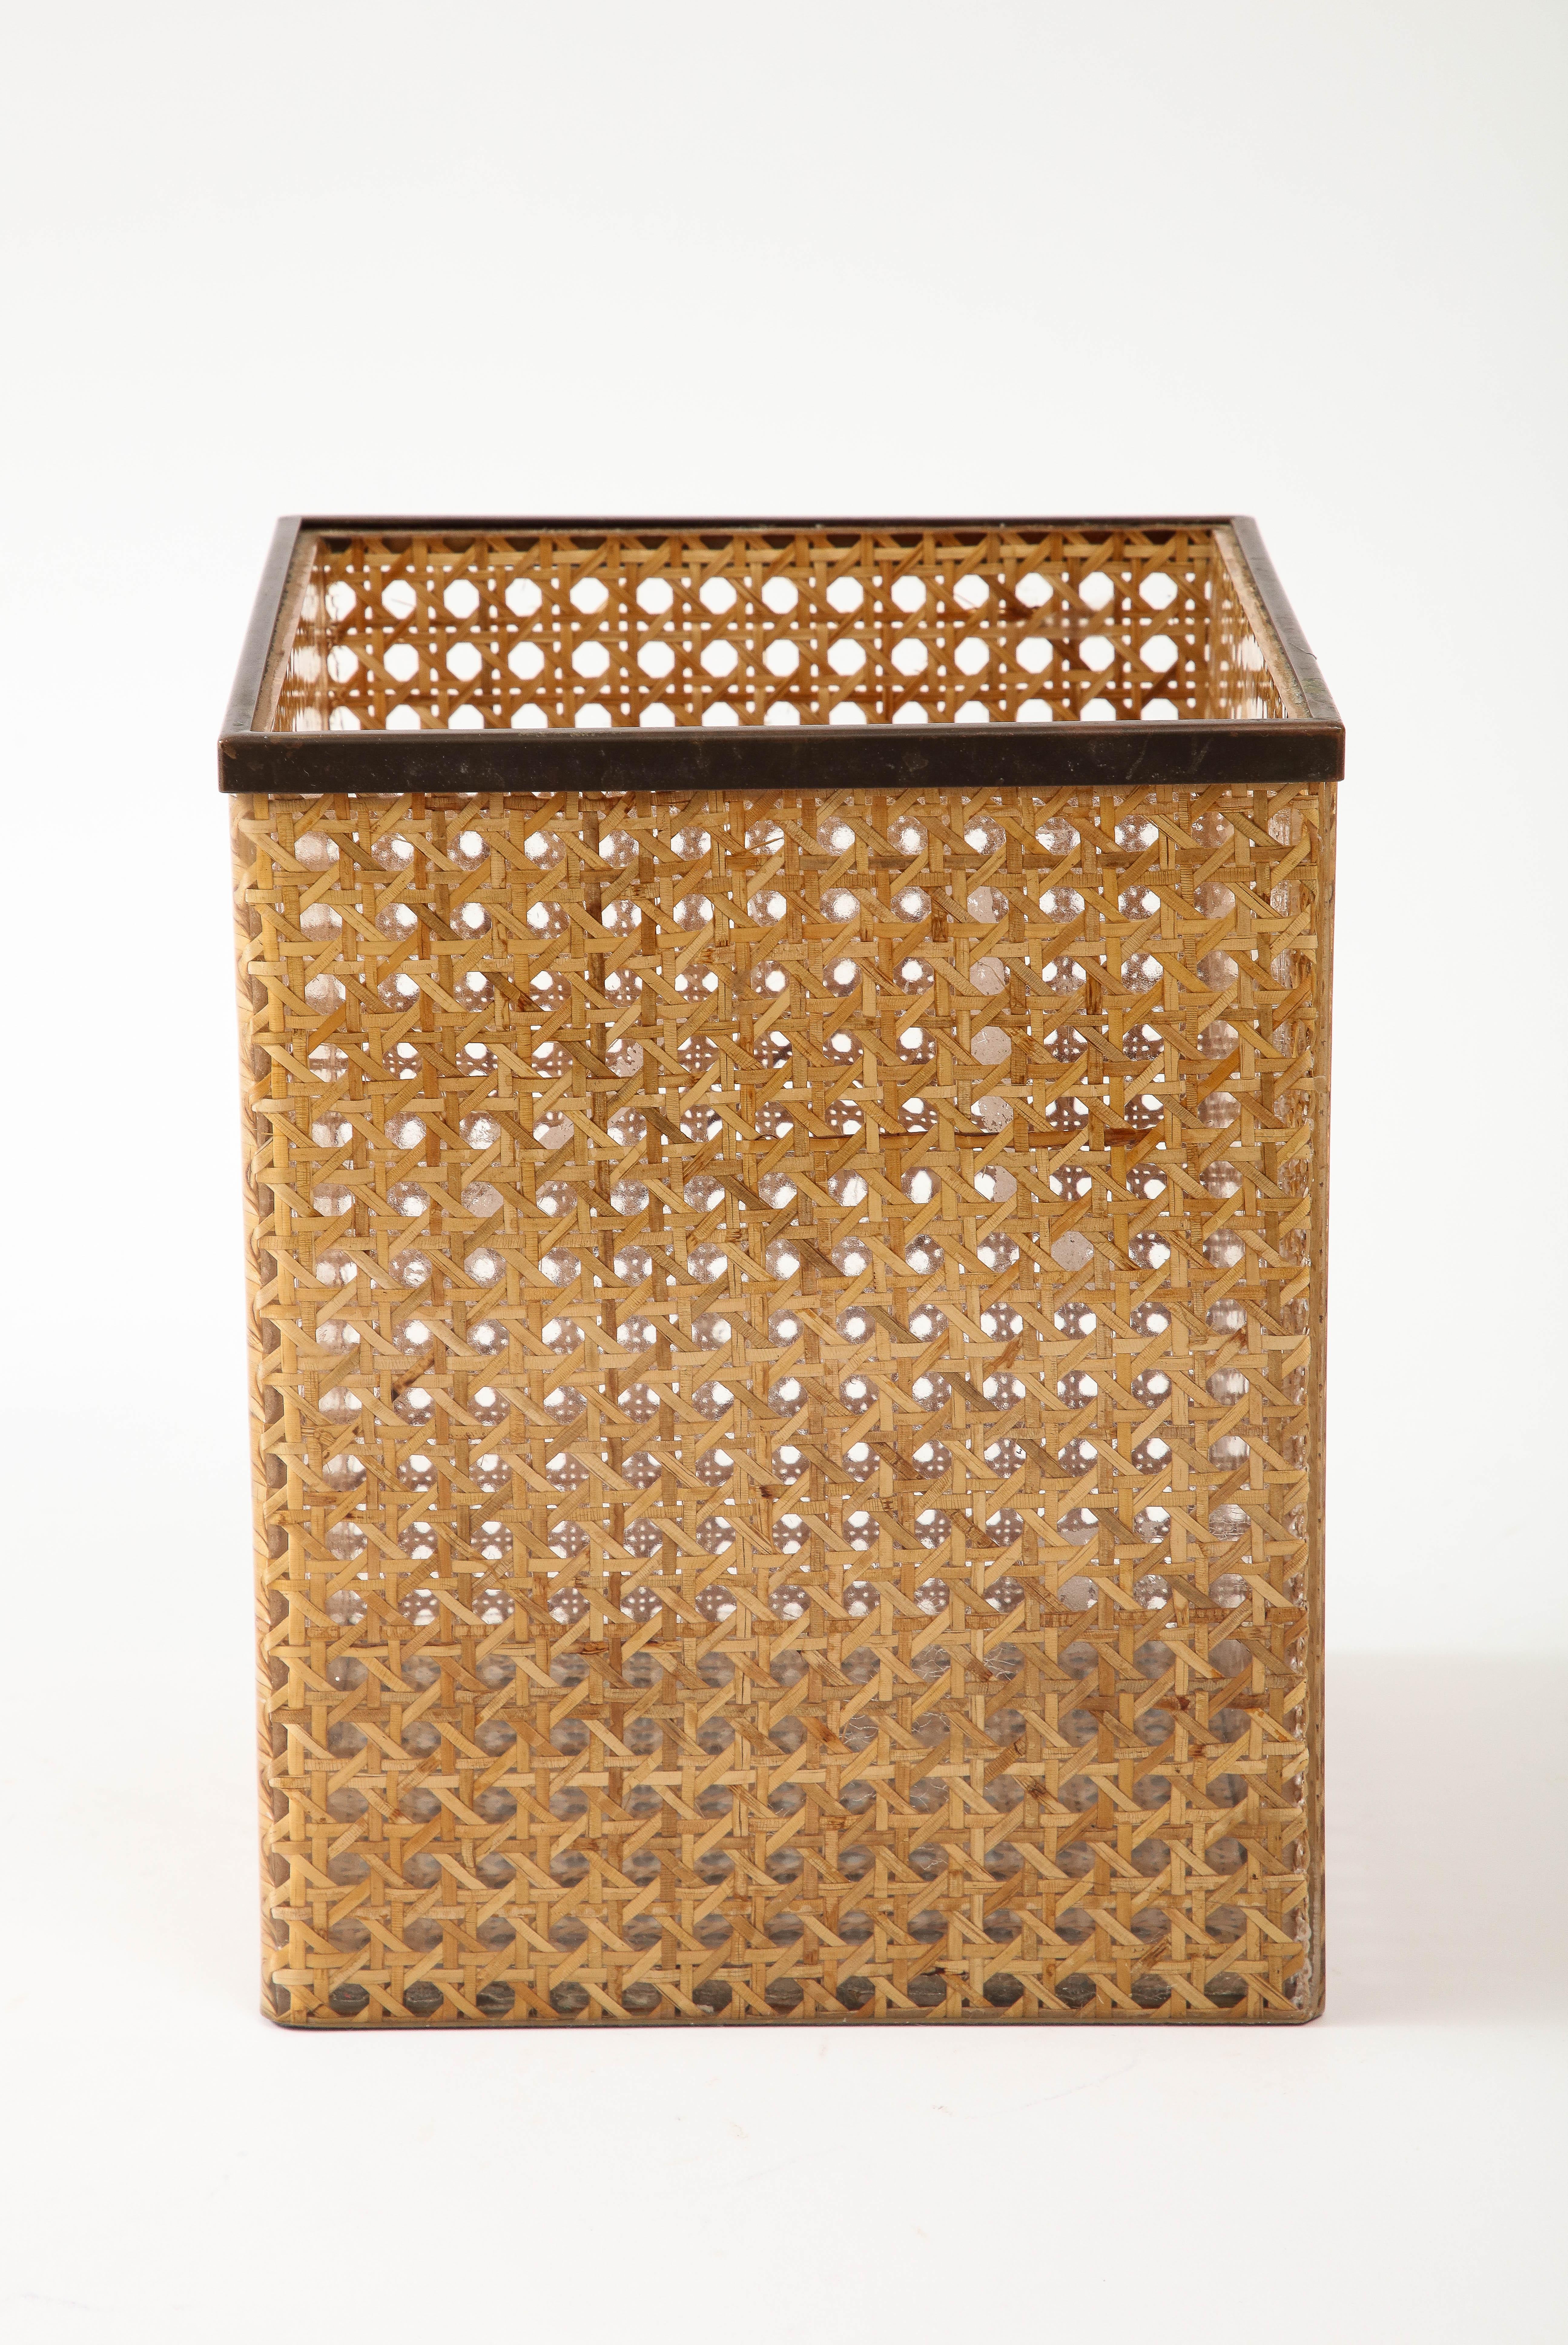 Christian Dior Home Lucite, Bronze, and Cane Bin, 1970 1